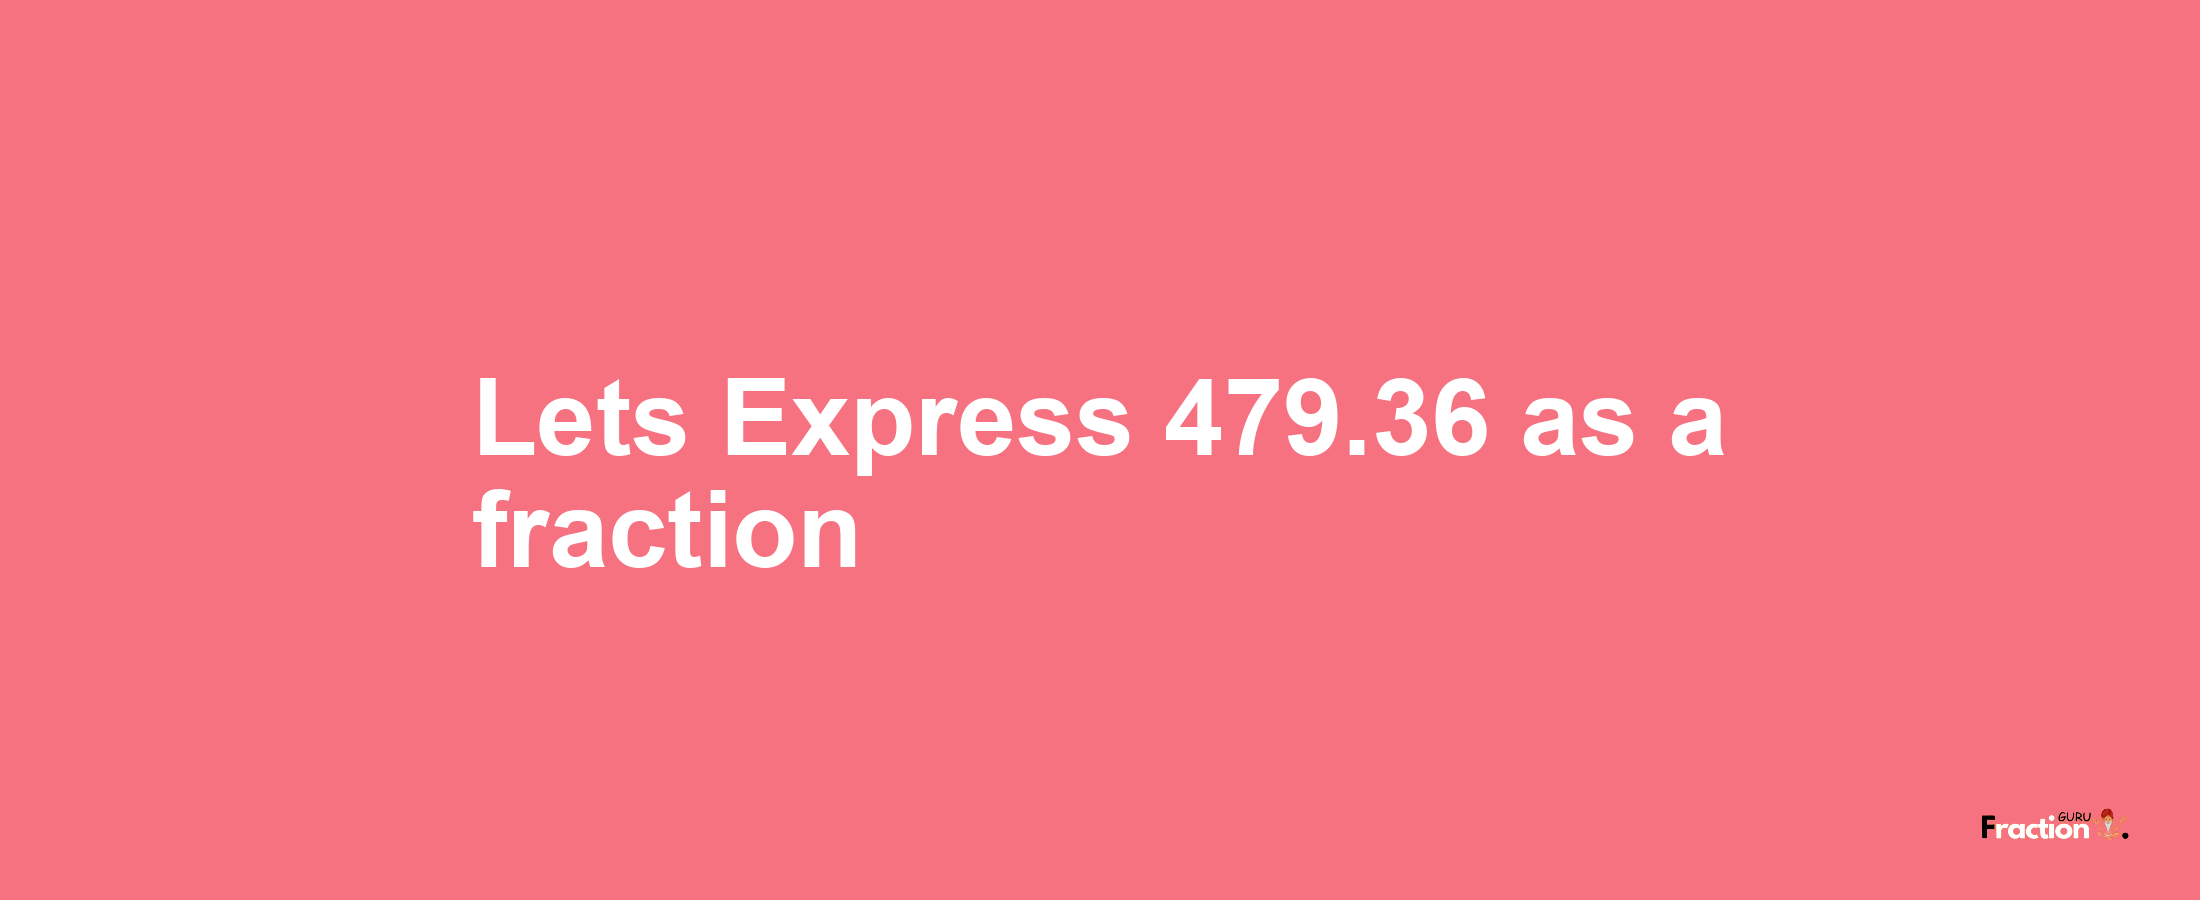 Lets Express 479.36 as afraction